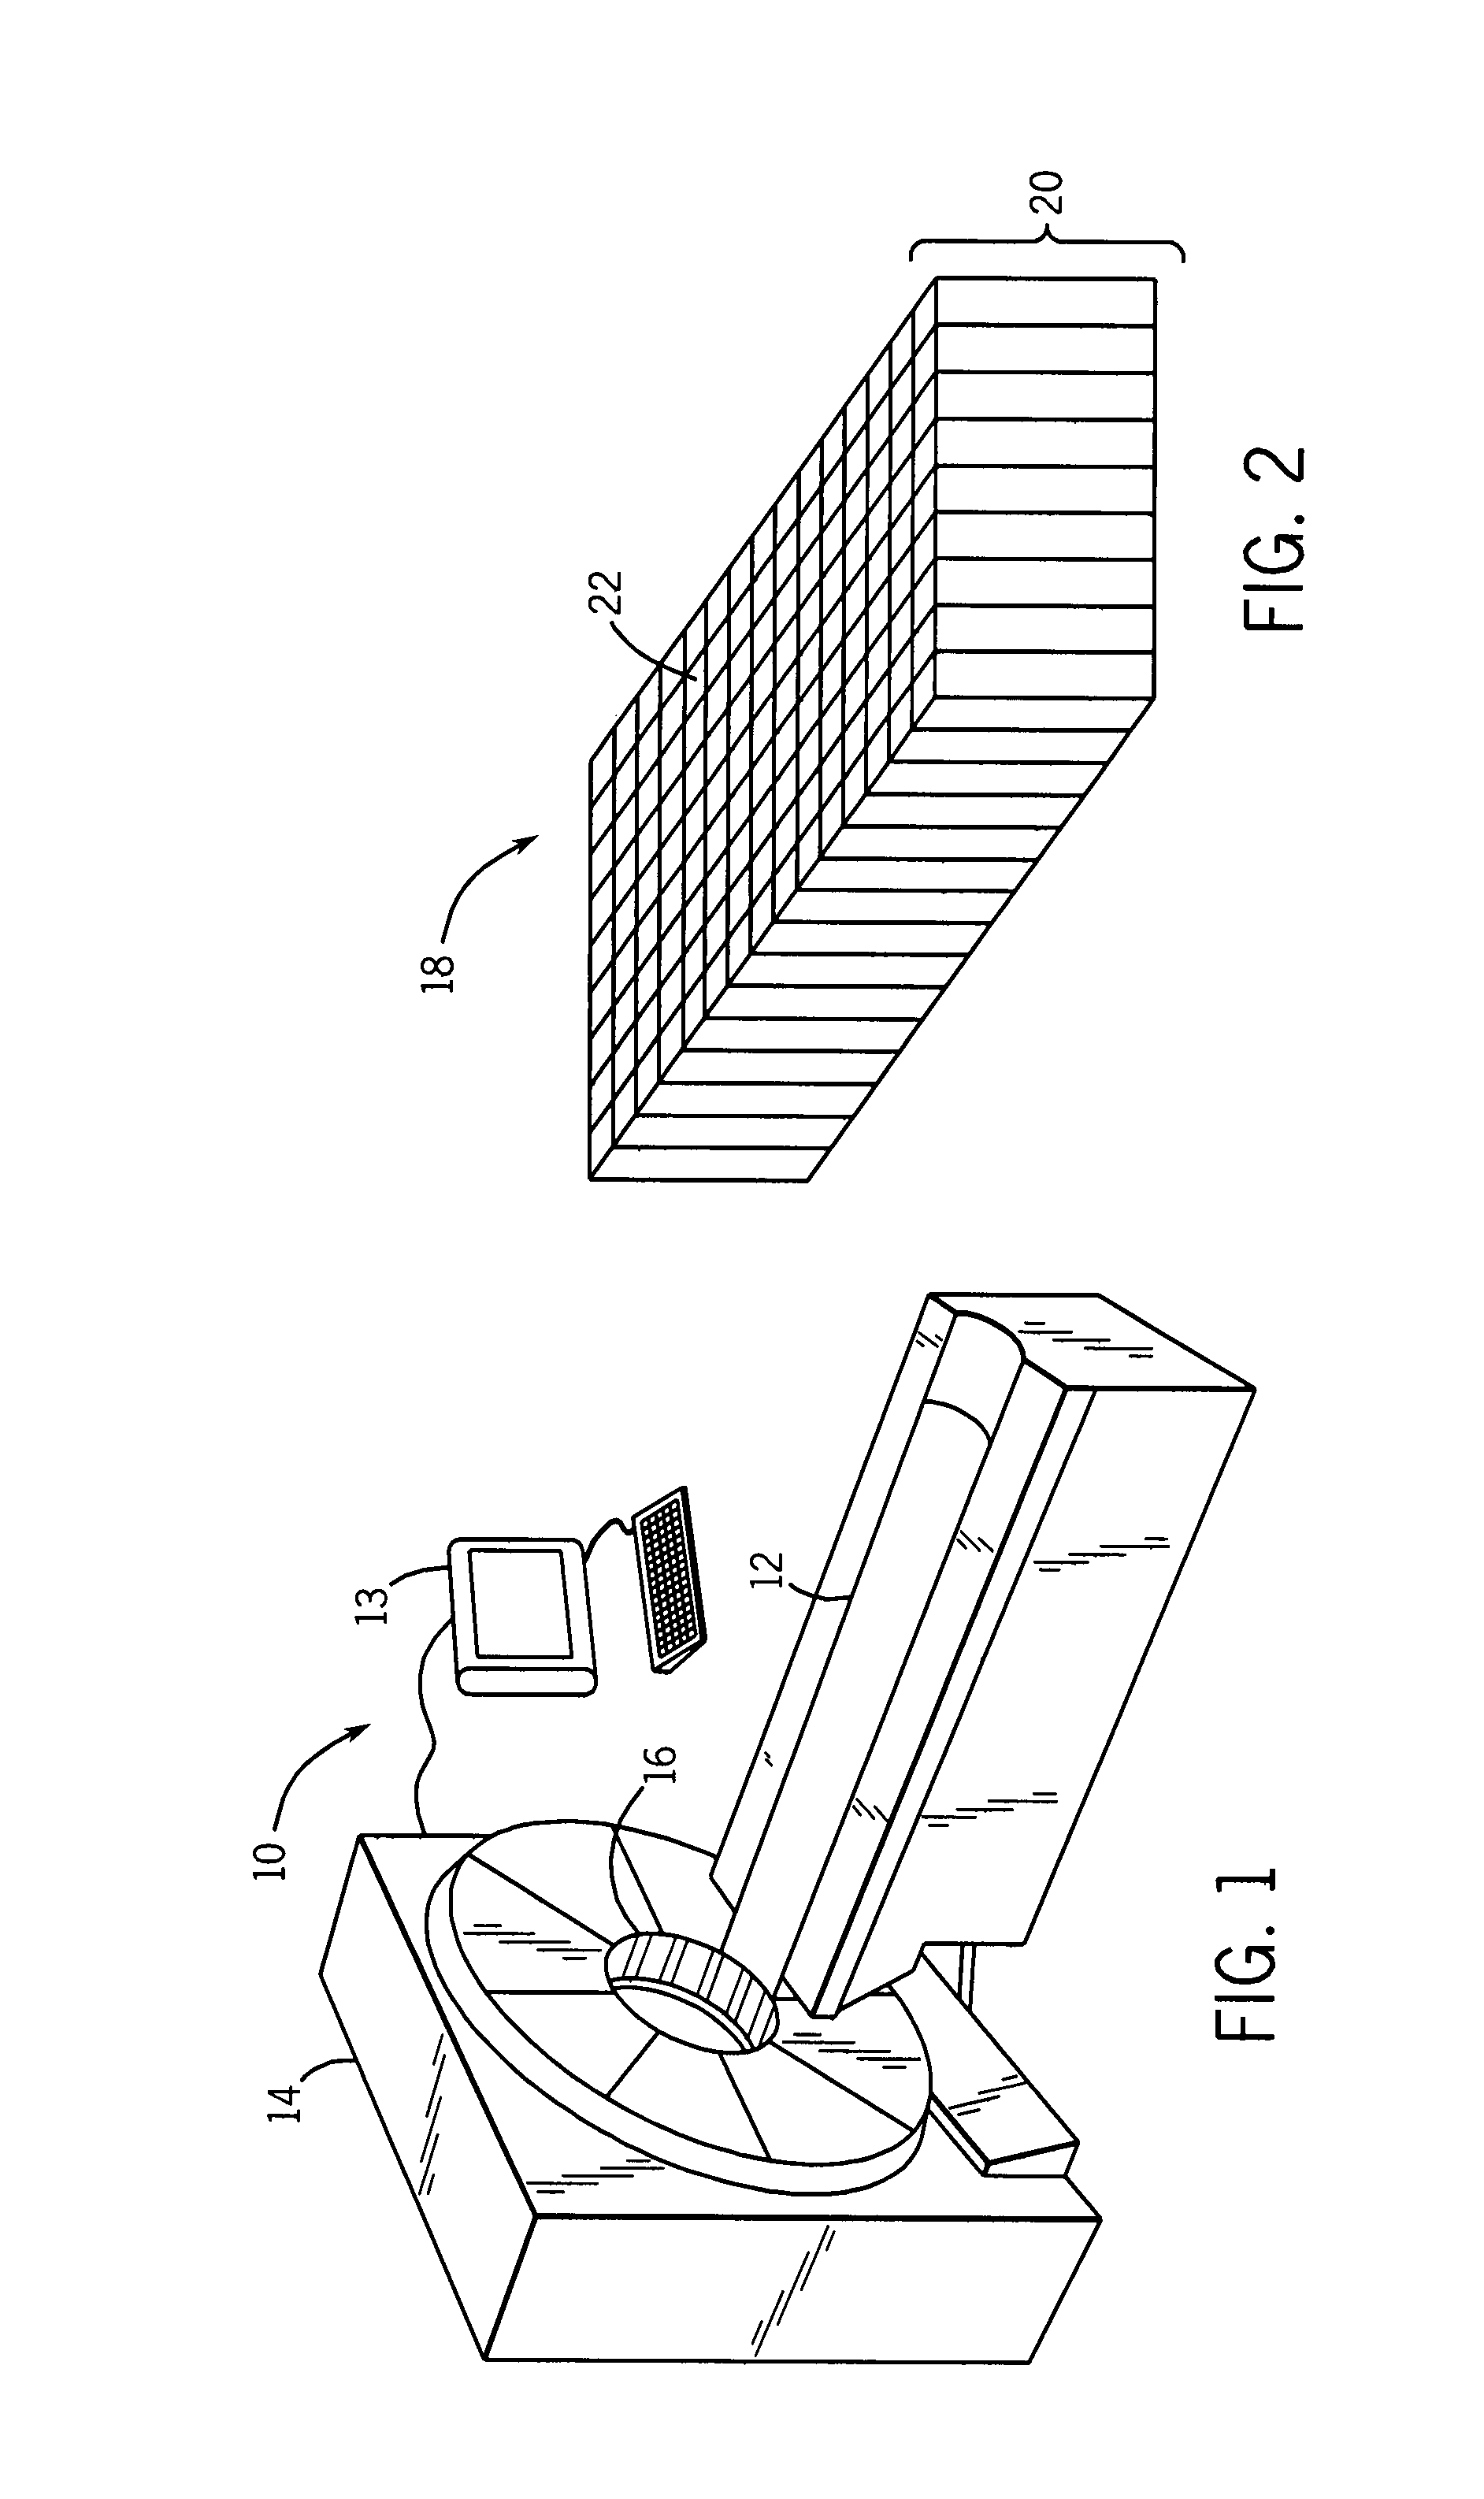 Nano-scale metal oxide, oxyhalide and oxysulfide scintillation materials and methods for making same